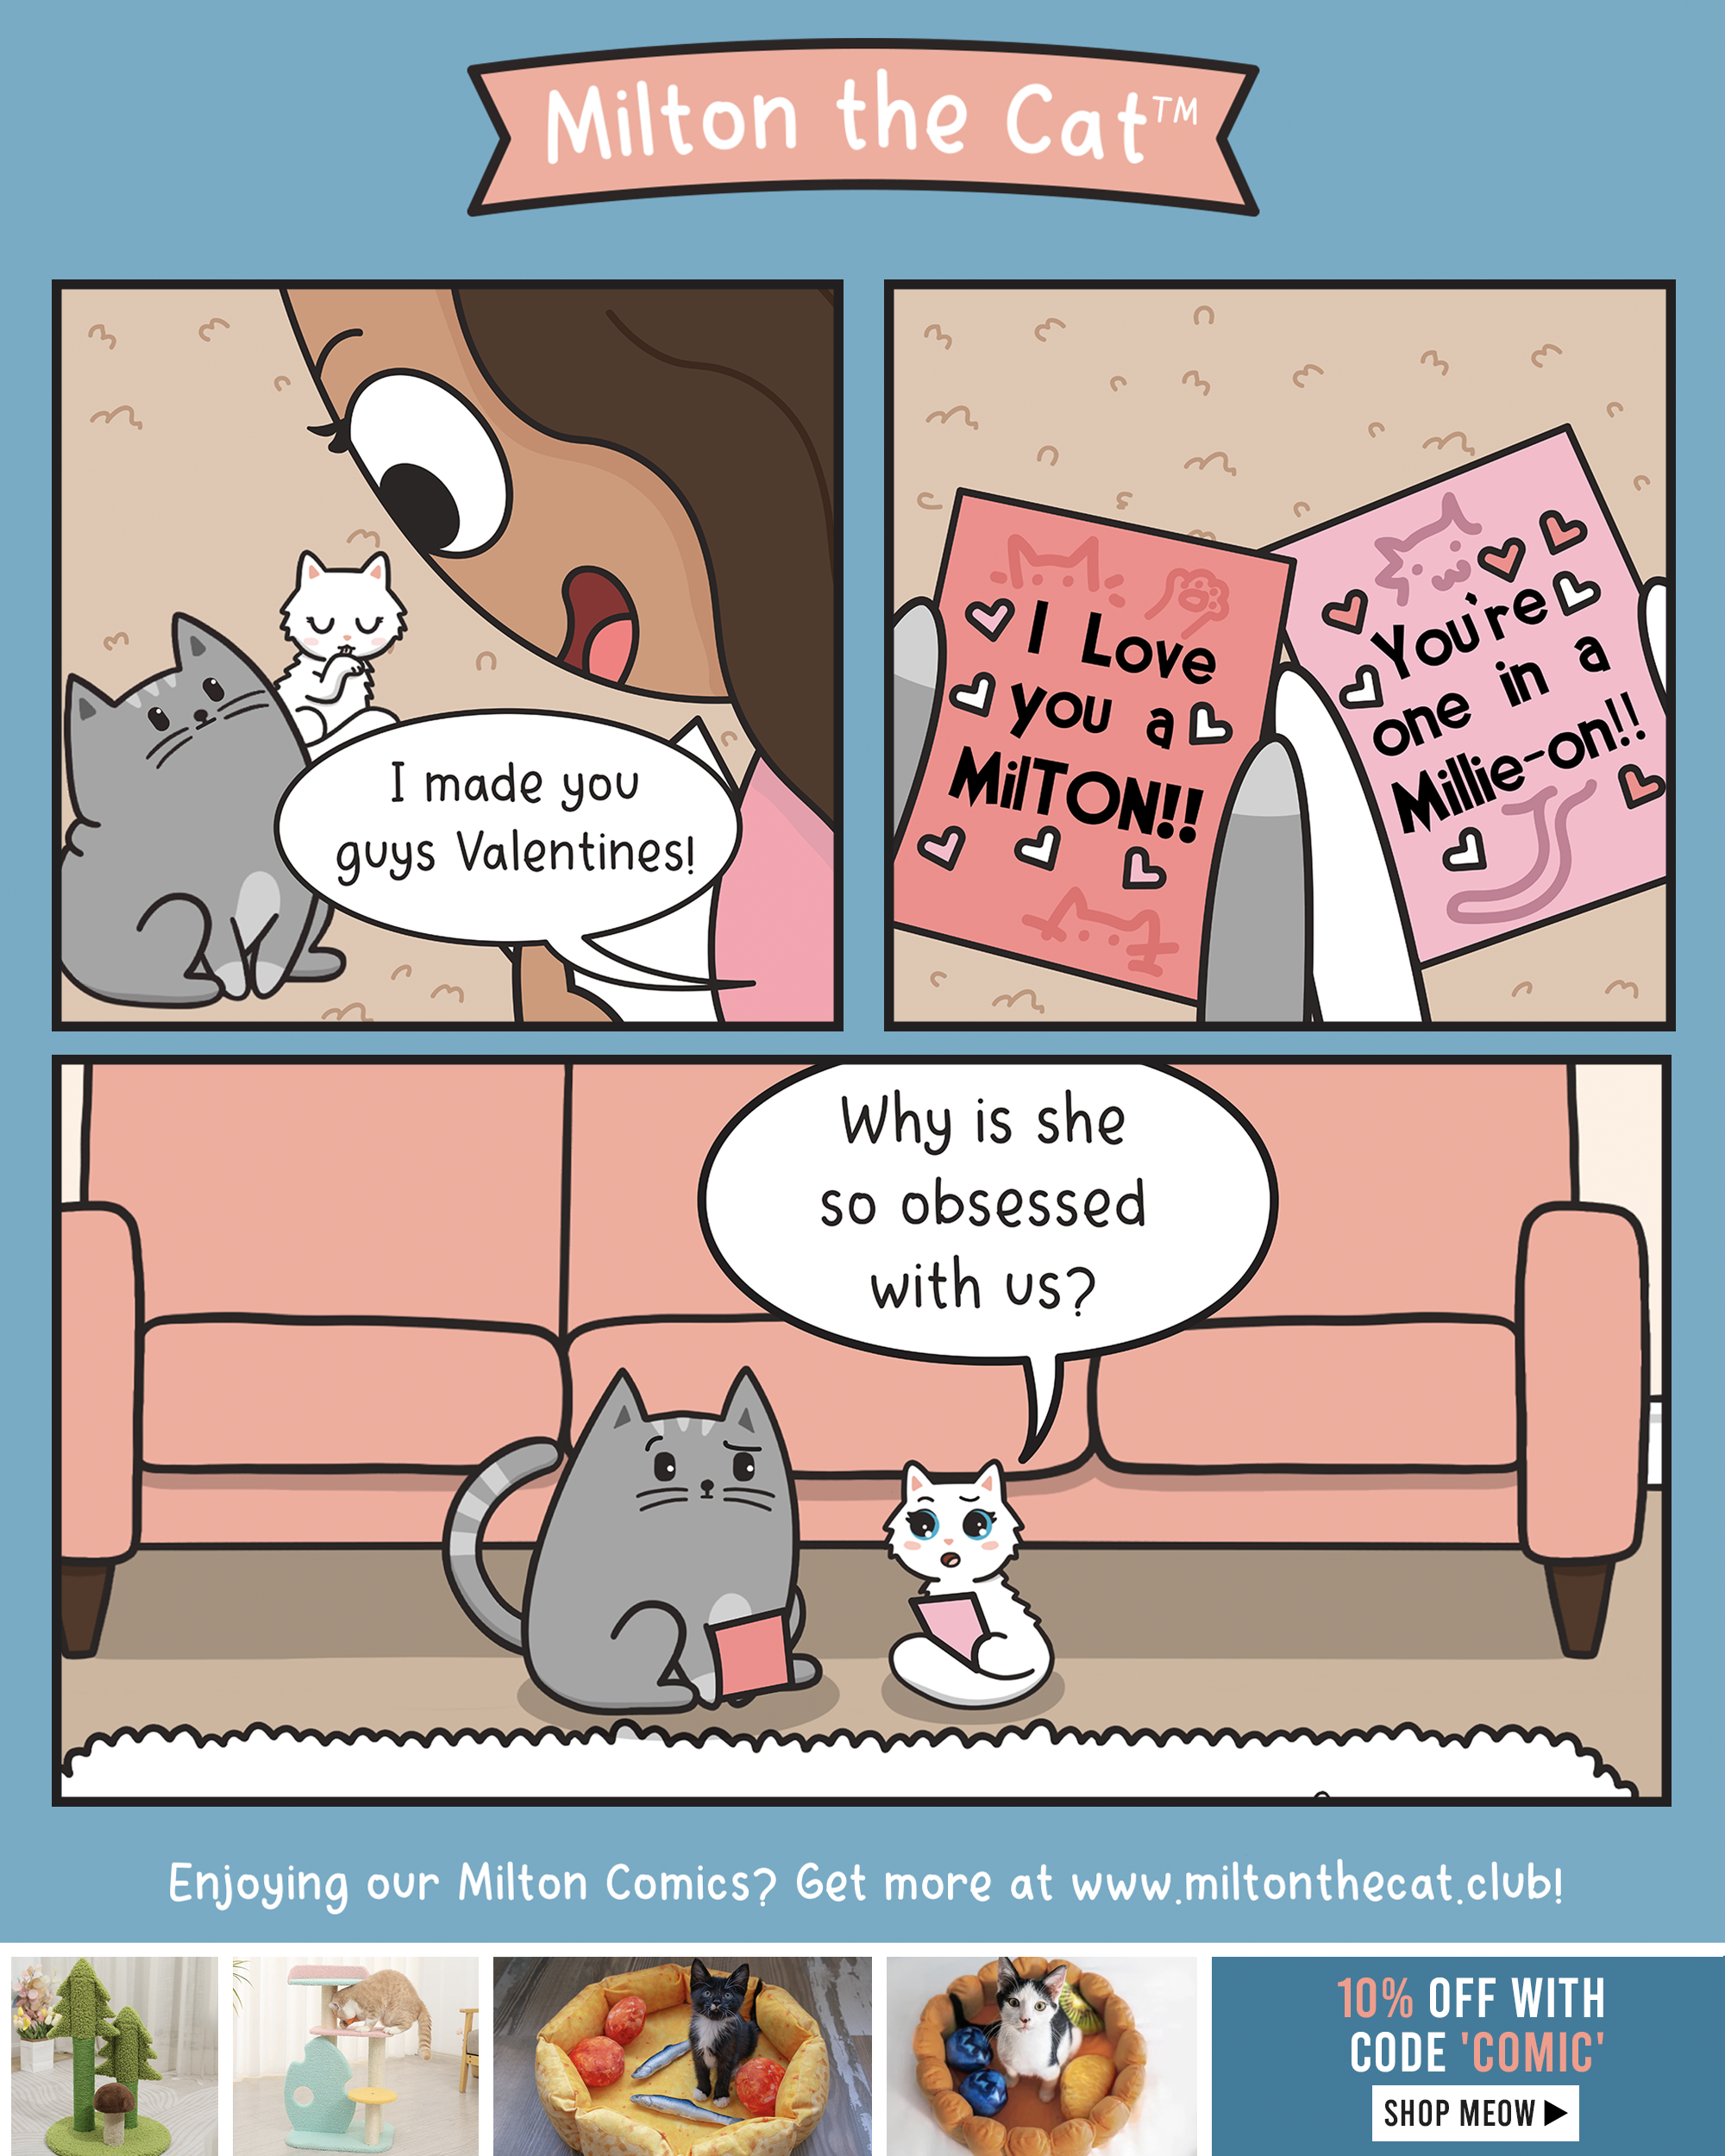 MILTON THE CAT: A three panel comic. Panel 1: A brown-haired girl looks down on her two cats, a chubby tabby (Milton) and white kitten (Millie). Girl: I made you guys Valentines! Panel 2: The cats are holding cute cat Valentine's day cards that read: I love you a Mil-TON and You're one in a Millie-On!! Panel 3: Milton and Millie exchange confused and concerned glances. Millie: Why is she so obsessed with us?